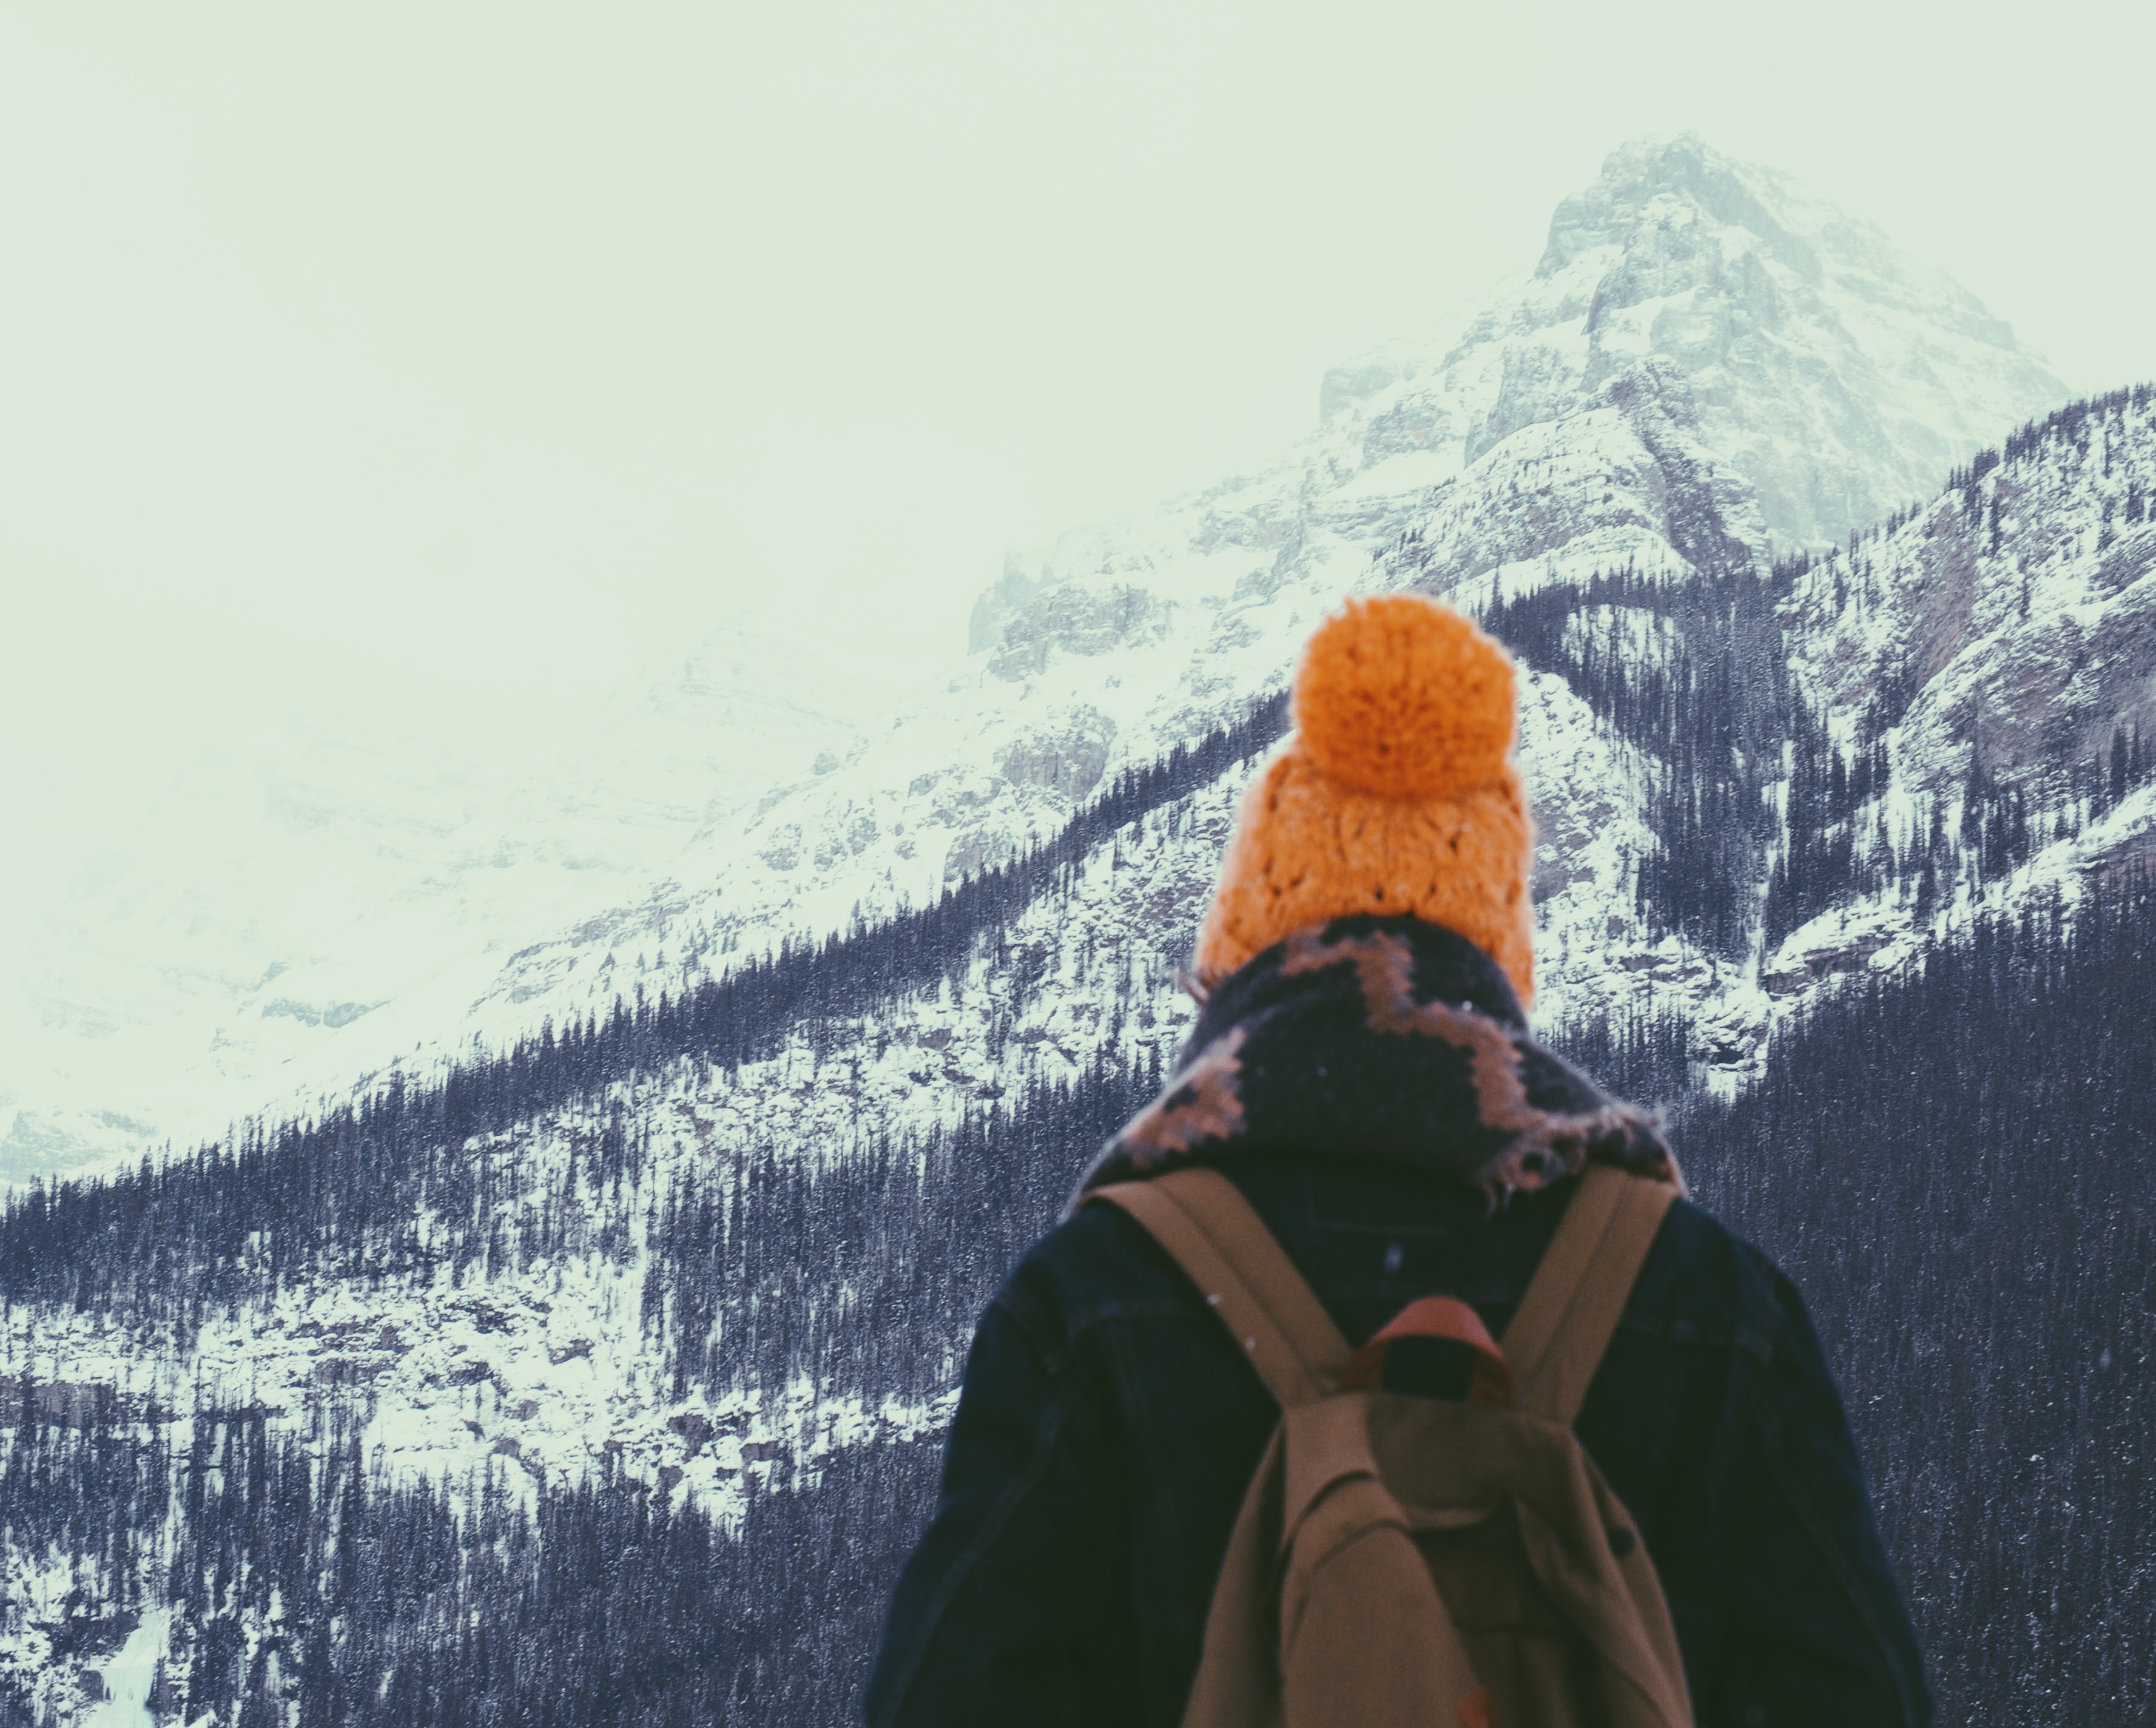 photo of person wearing orange knit hat facing through mountain filled with pine trees